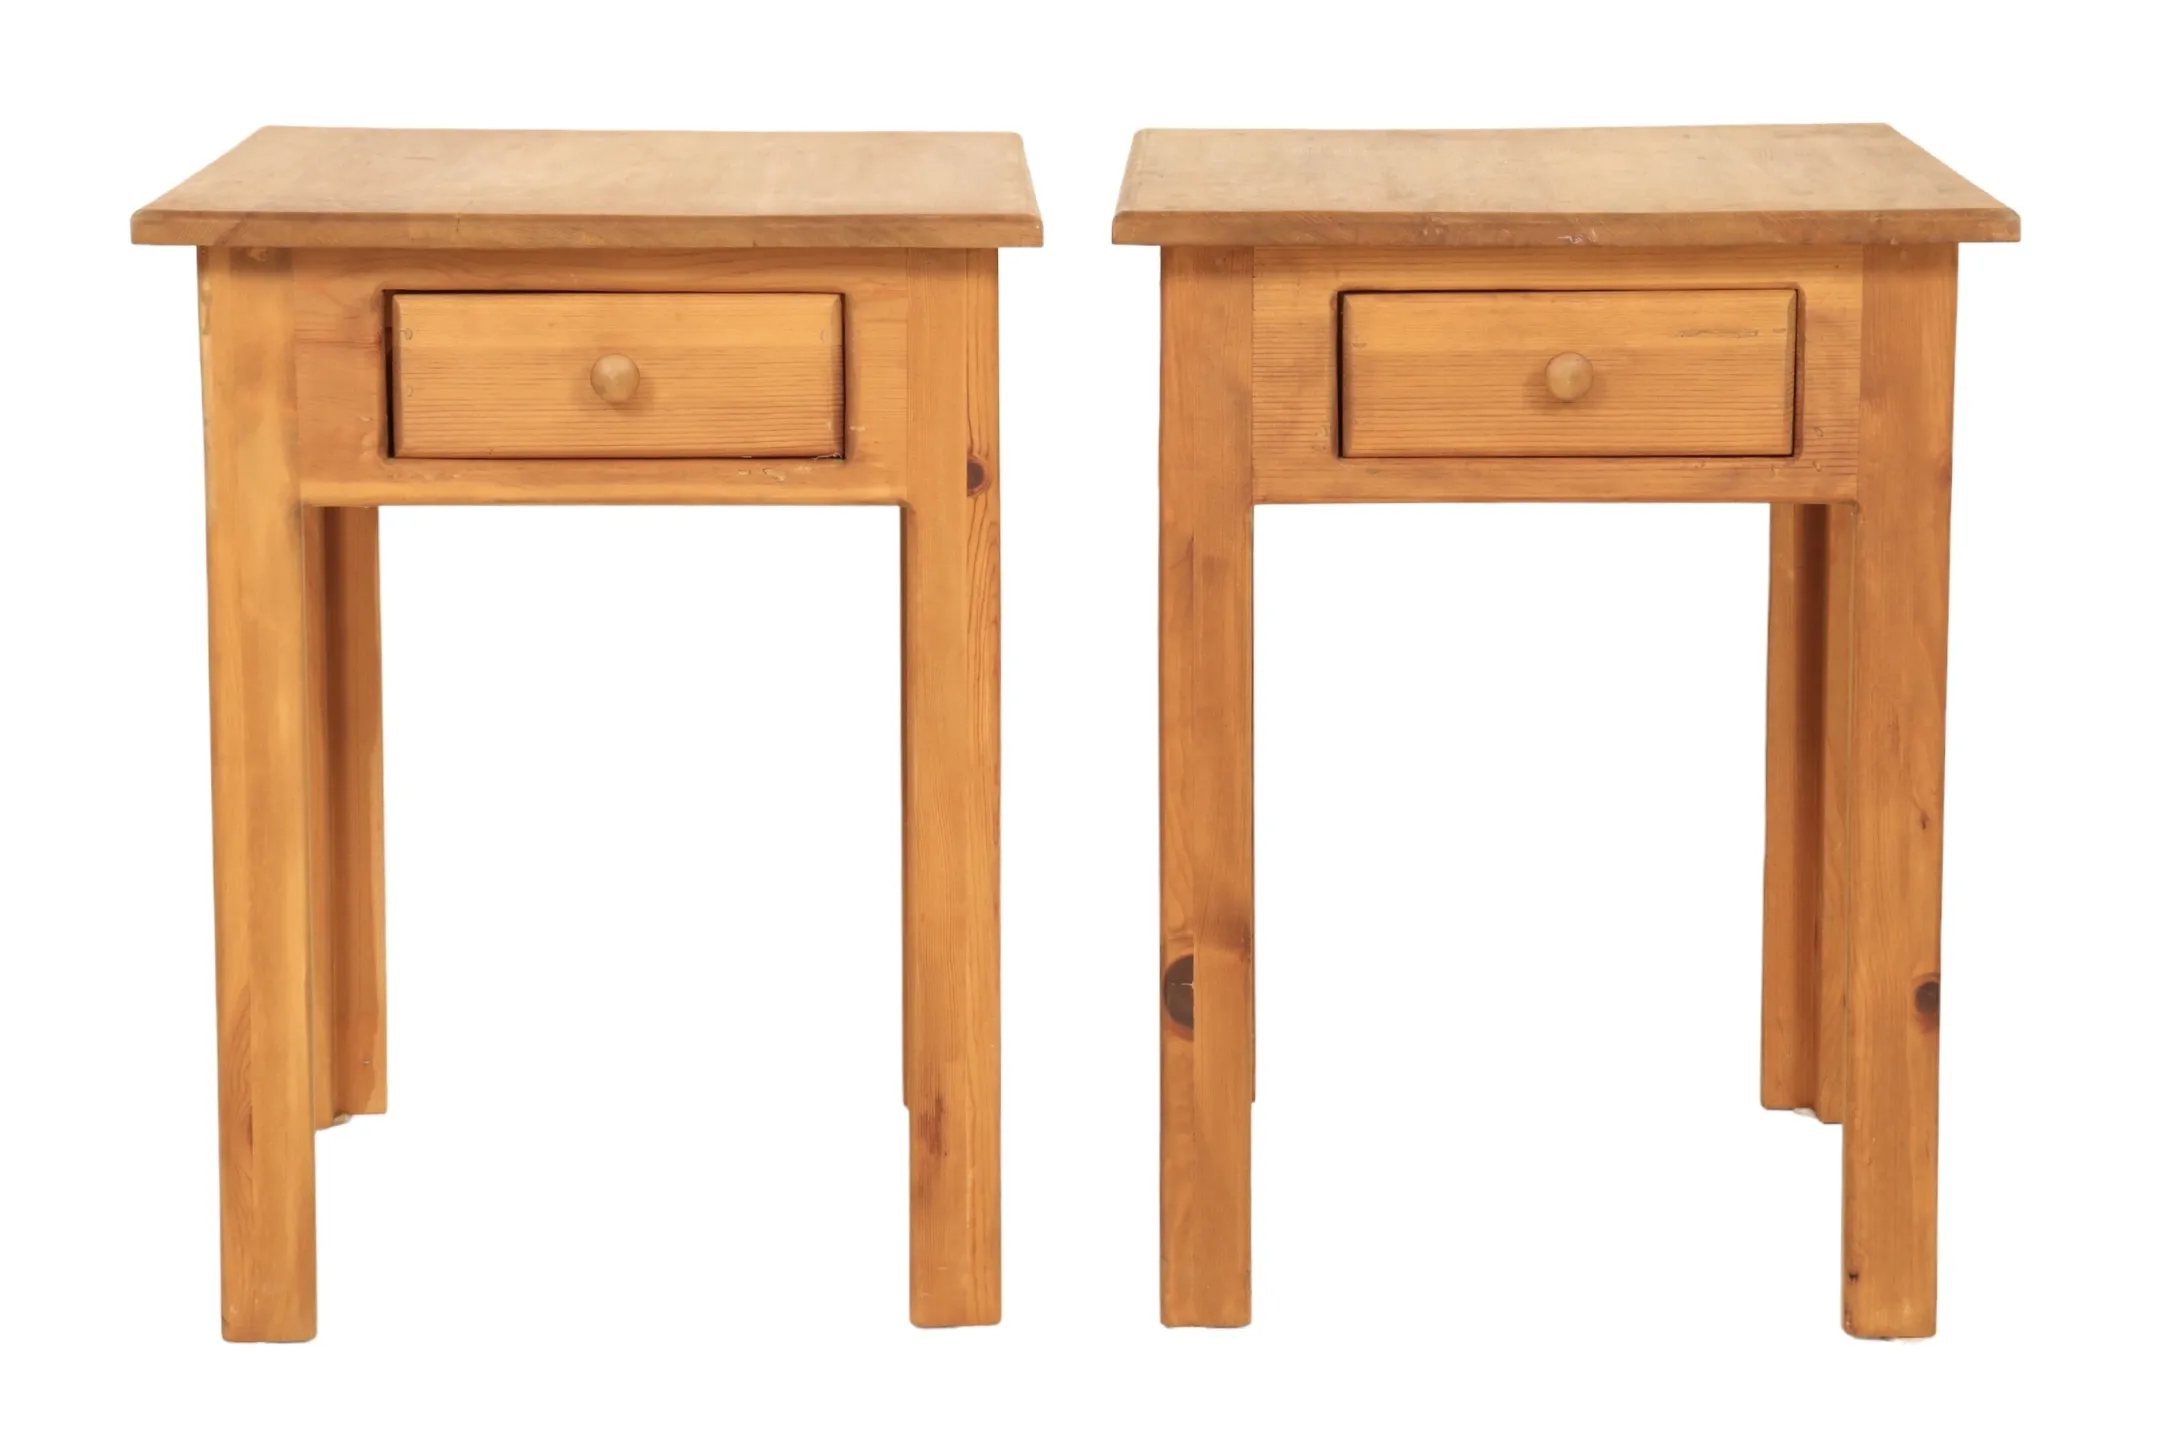 Craftsman Pine Side Tables - a Pair - Interesting Things